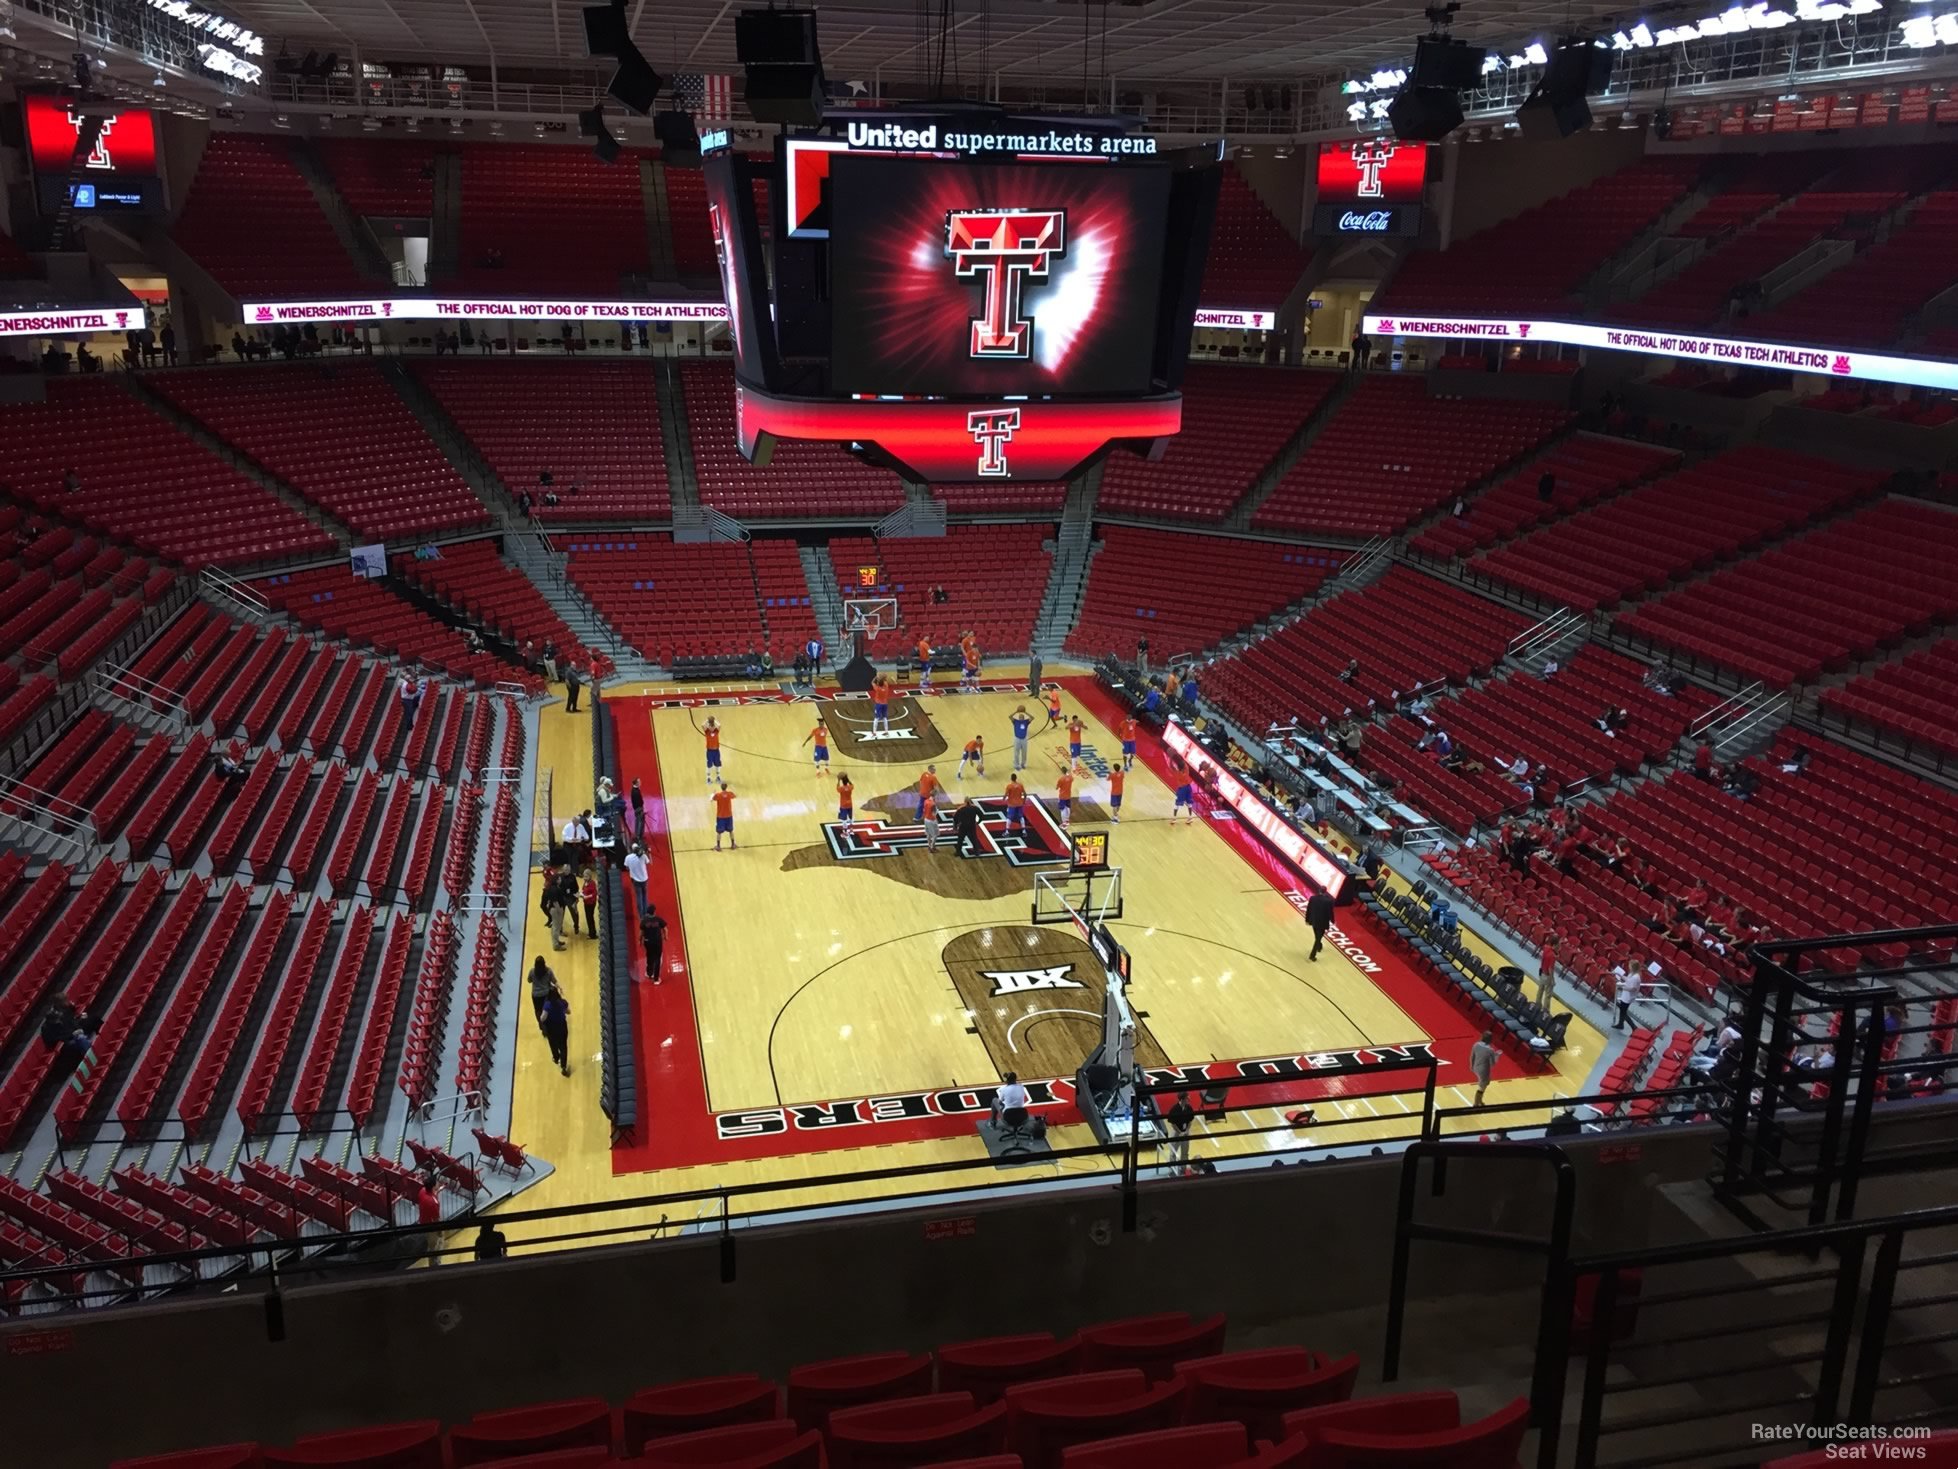 section 226, row 7 seat view  - united supermarkets arena